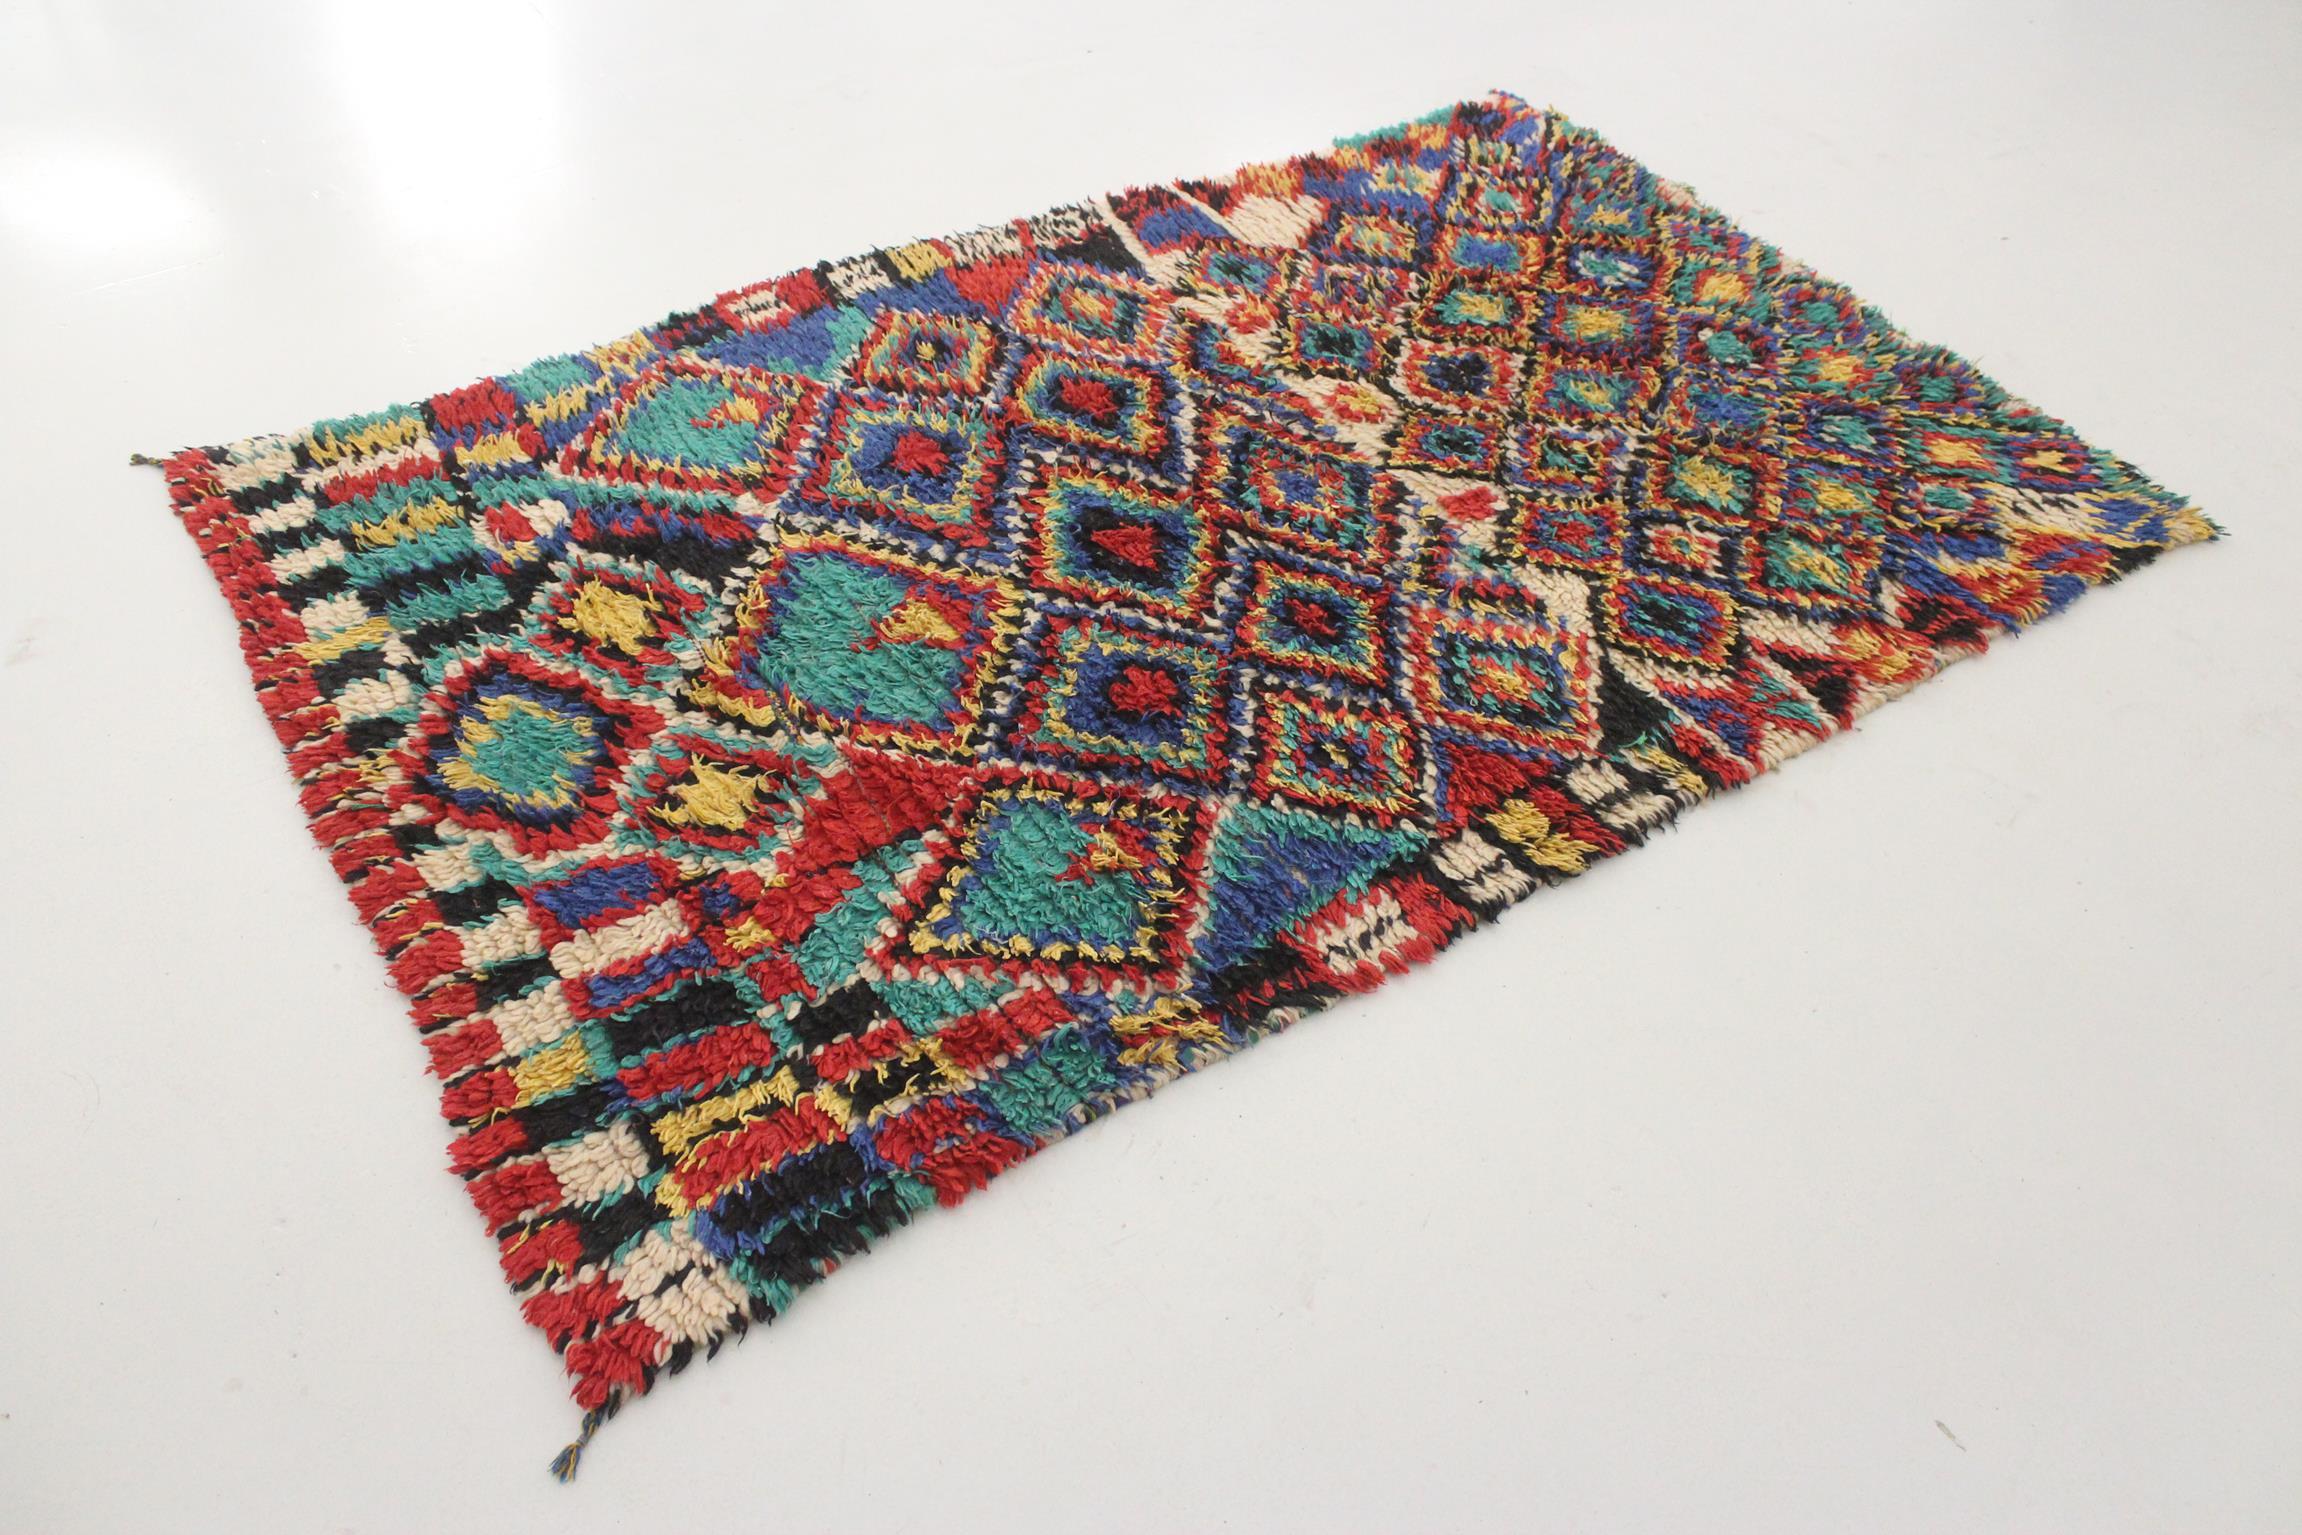 Hand-Woven Vintage Moroccan Azilal rug - Blue/red/green - 4.1x6.5feet / 125x200cm For Sale